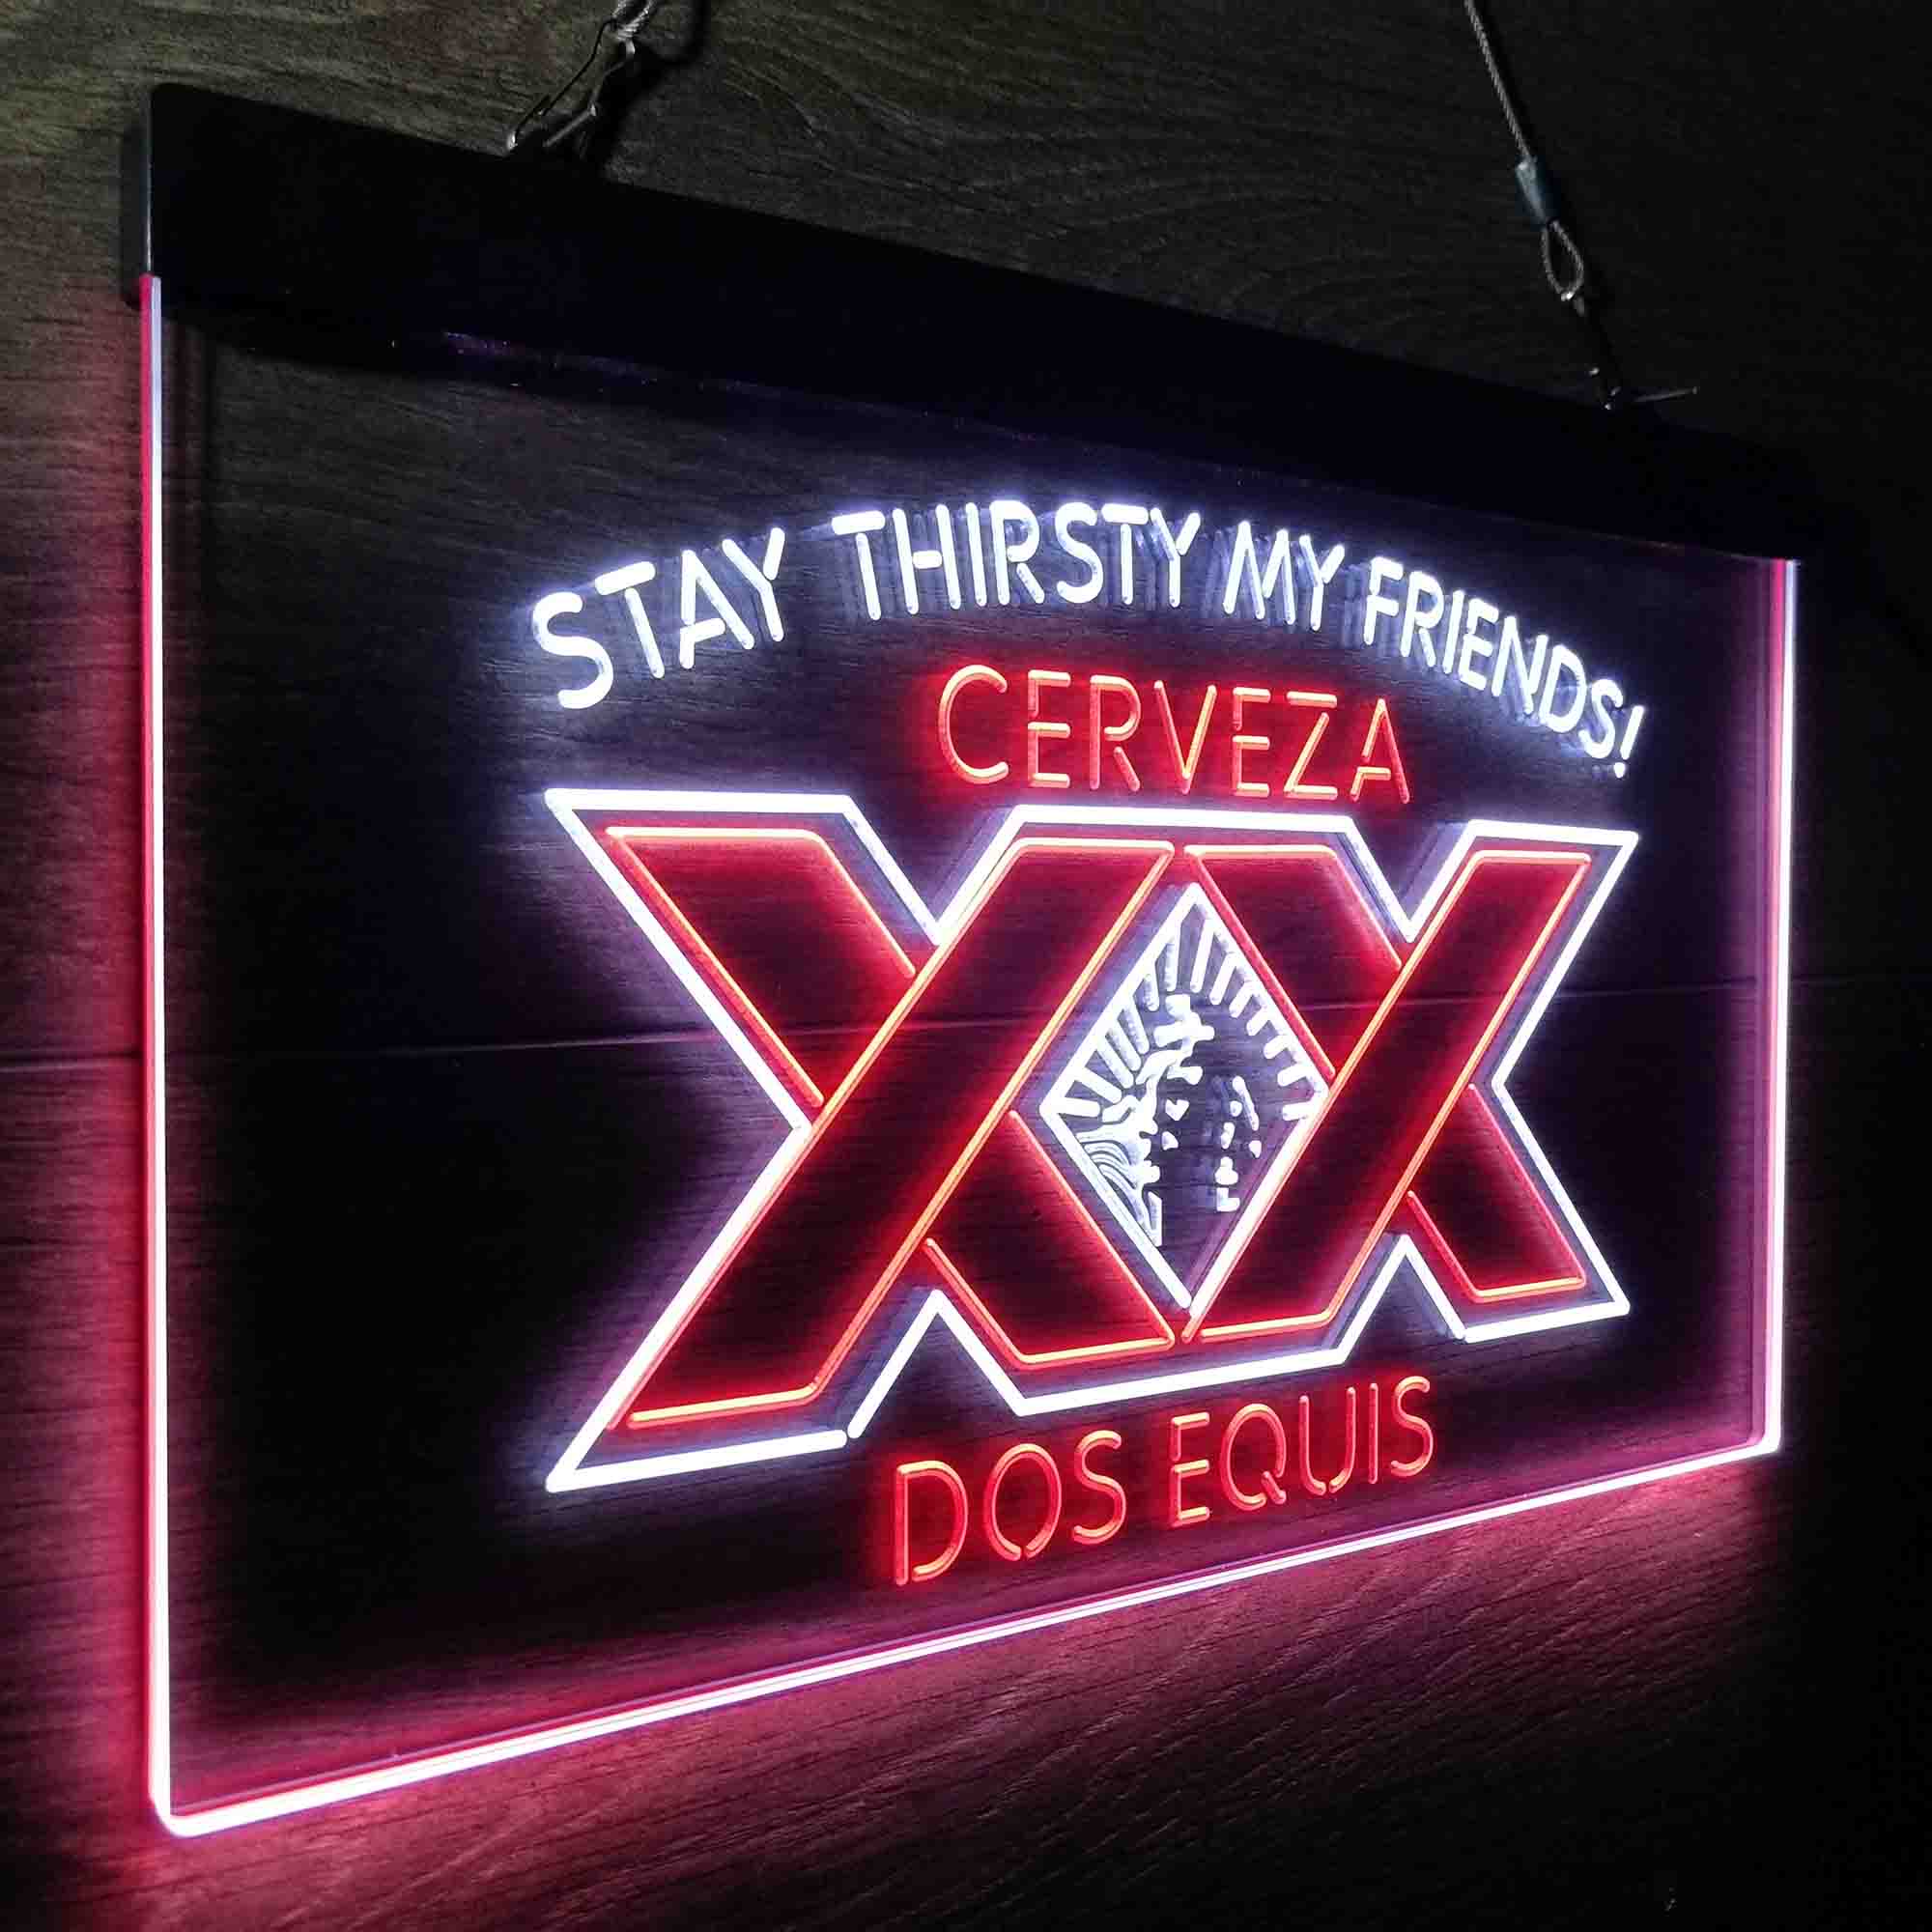 XX Dos Equis Stay Thirsty My Friends LED Neon Sign